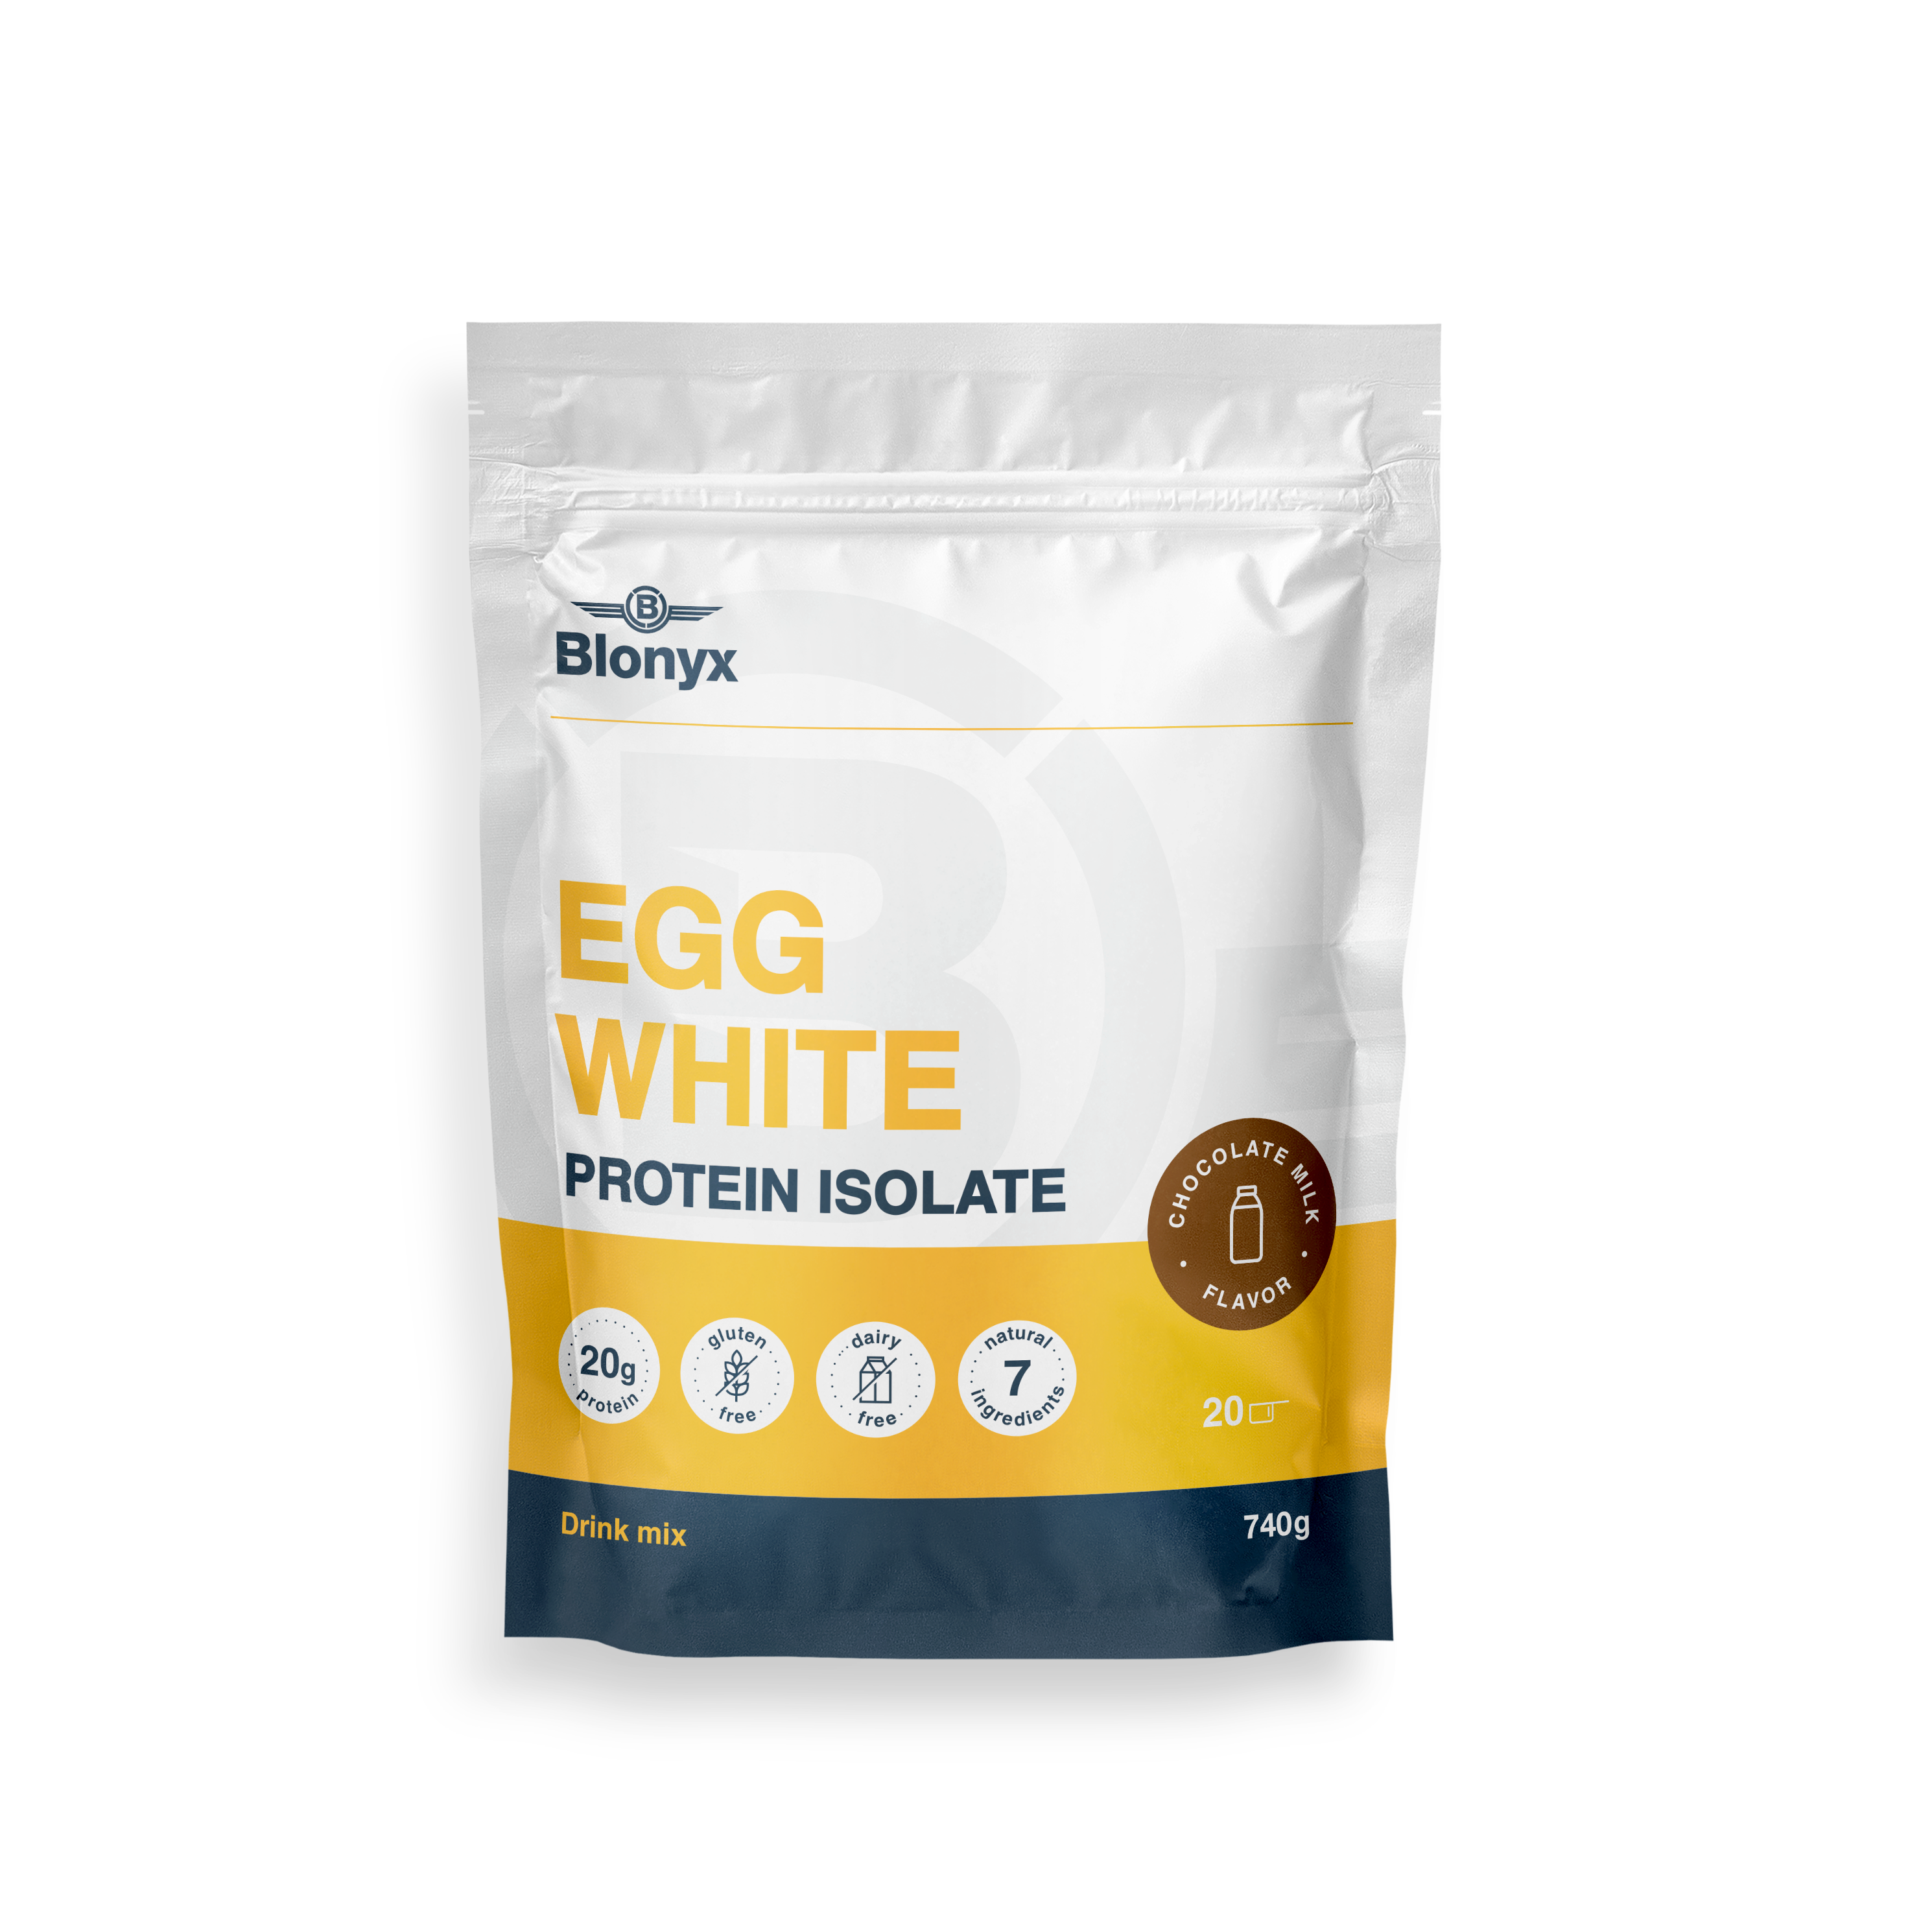 Front of Blonyx Egg White Protein Isolate bag